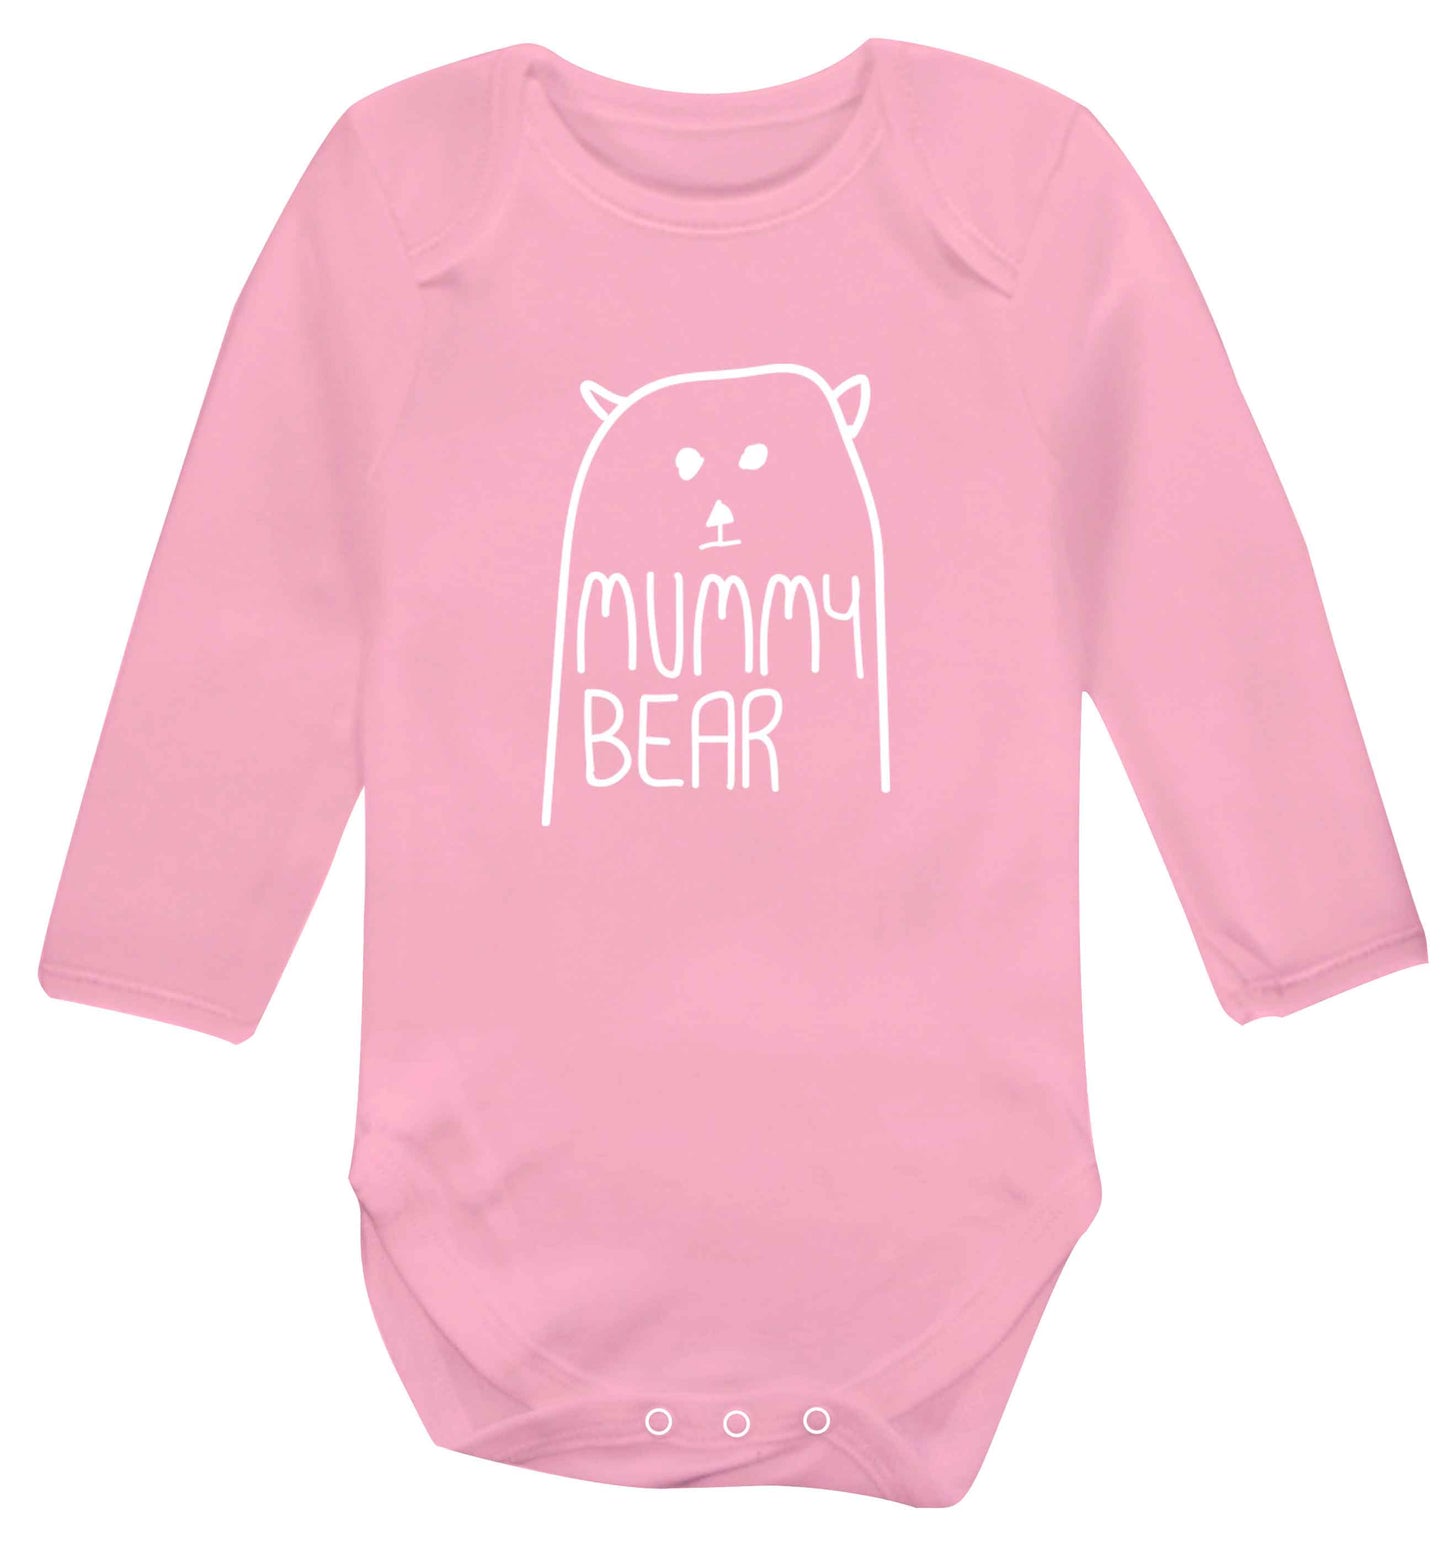 Mummy bear baby vest long sleeved pale pink 6-12 months